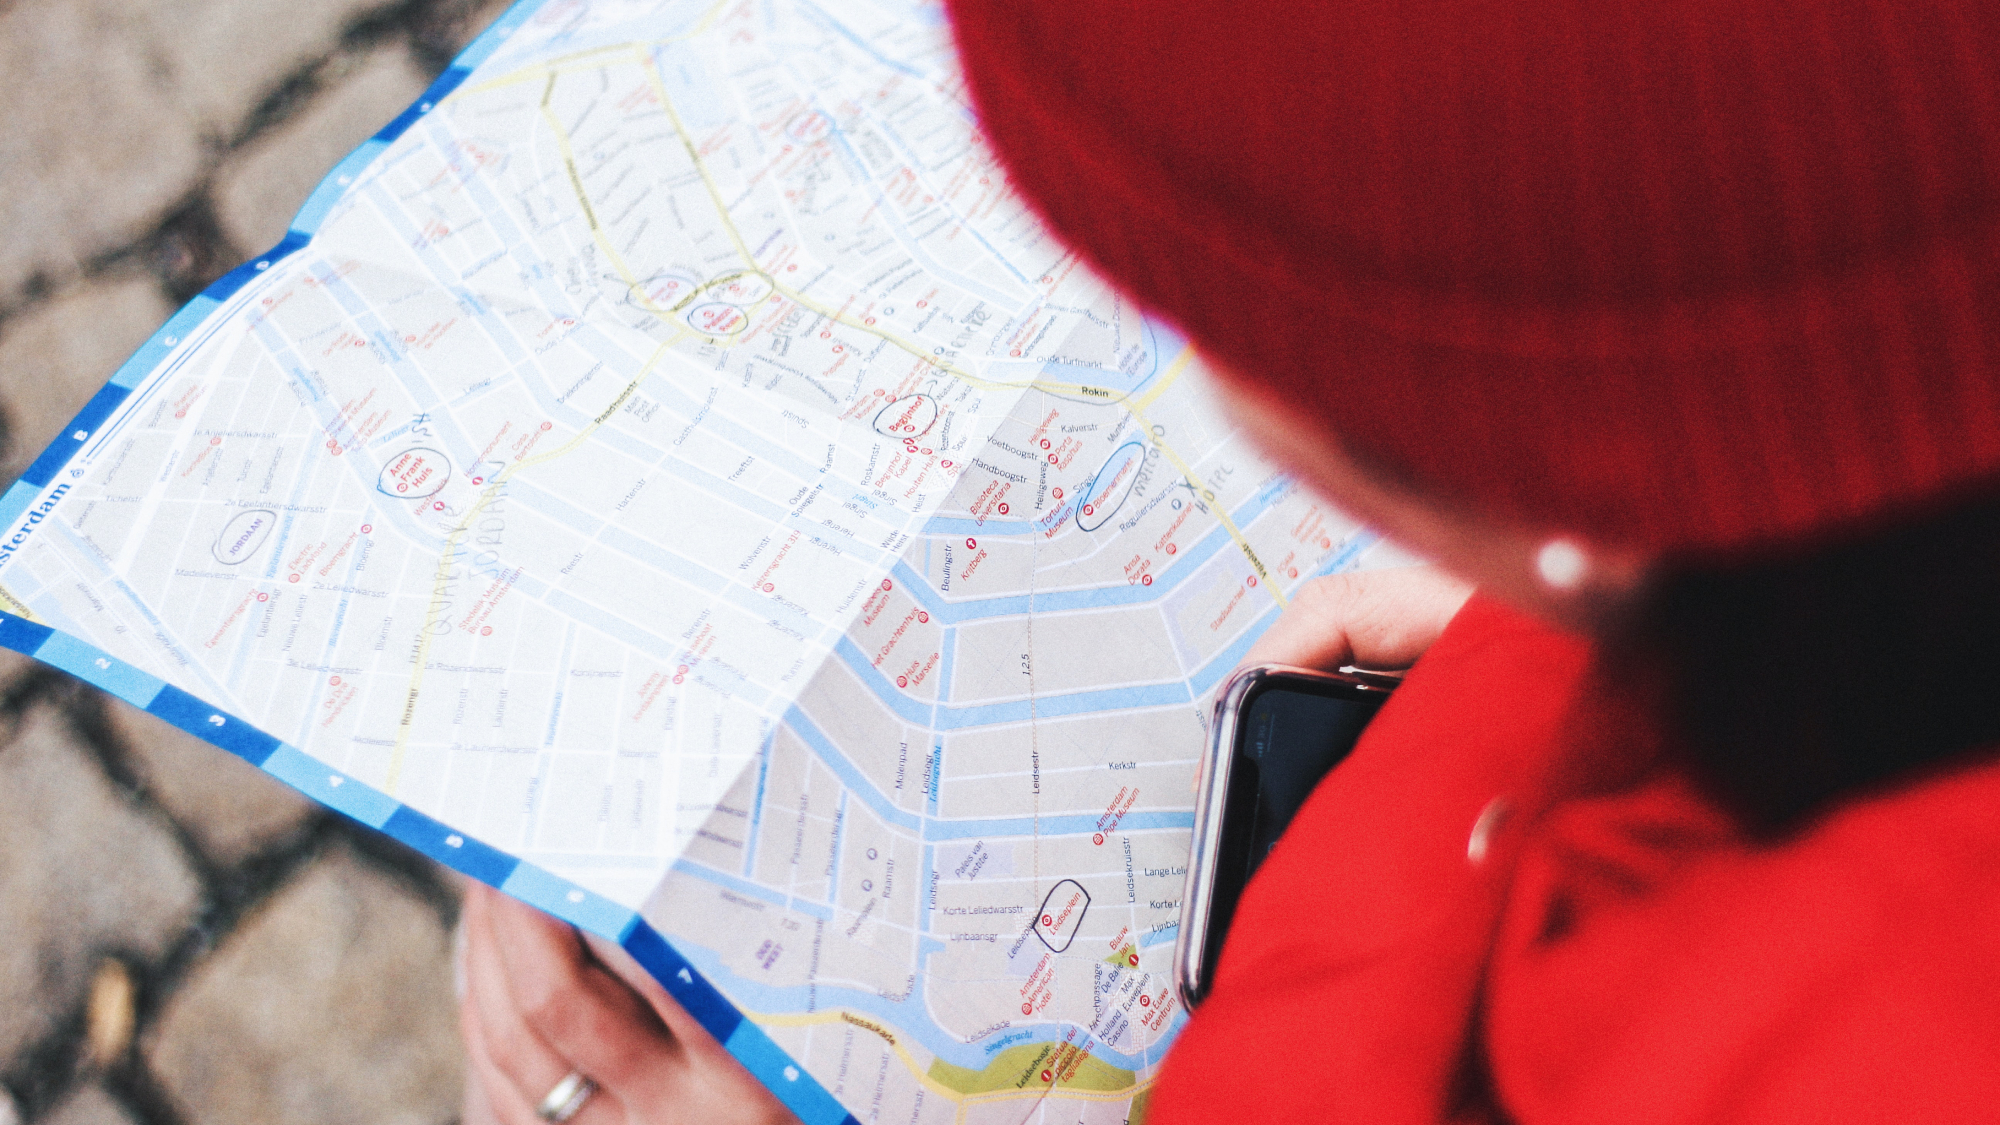 A person wearing a red jacket and a red knit beanie, looking at a paper map while holding their phone, possibly as they prepare to share their location with someone else via a location-sharing app.